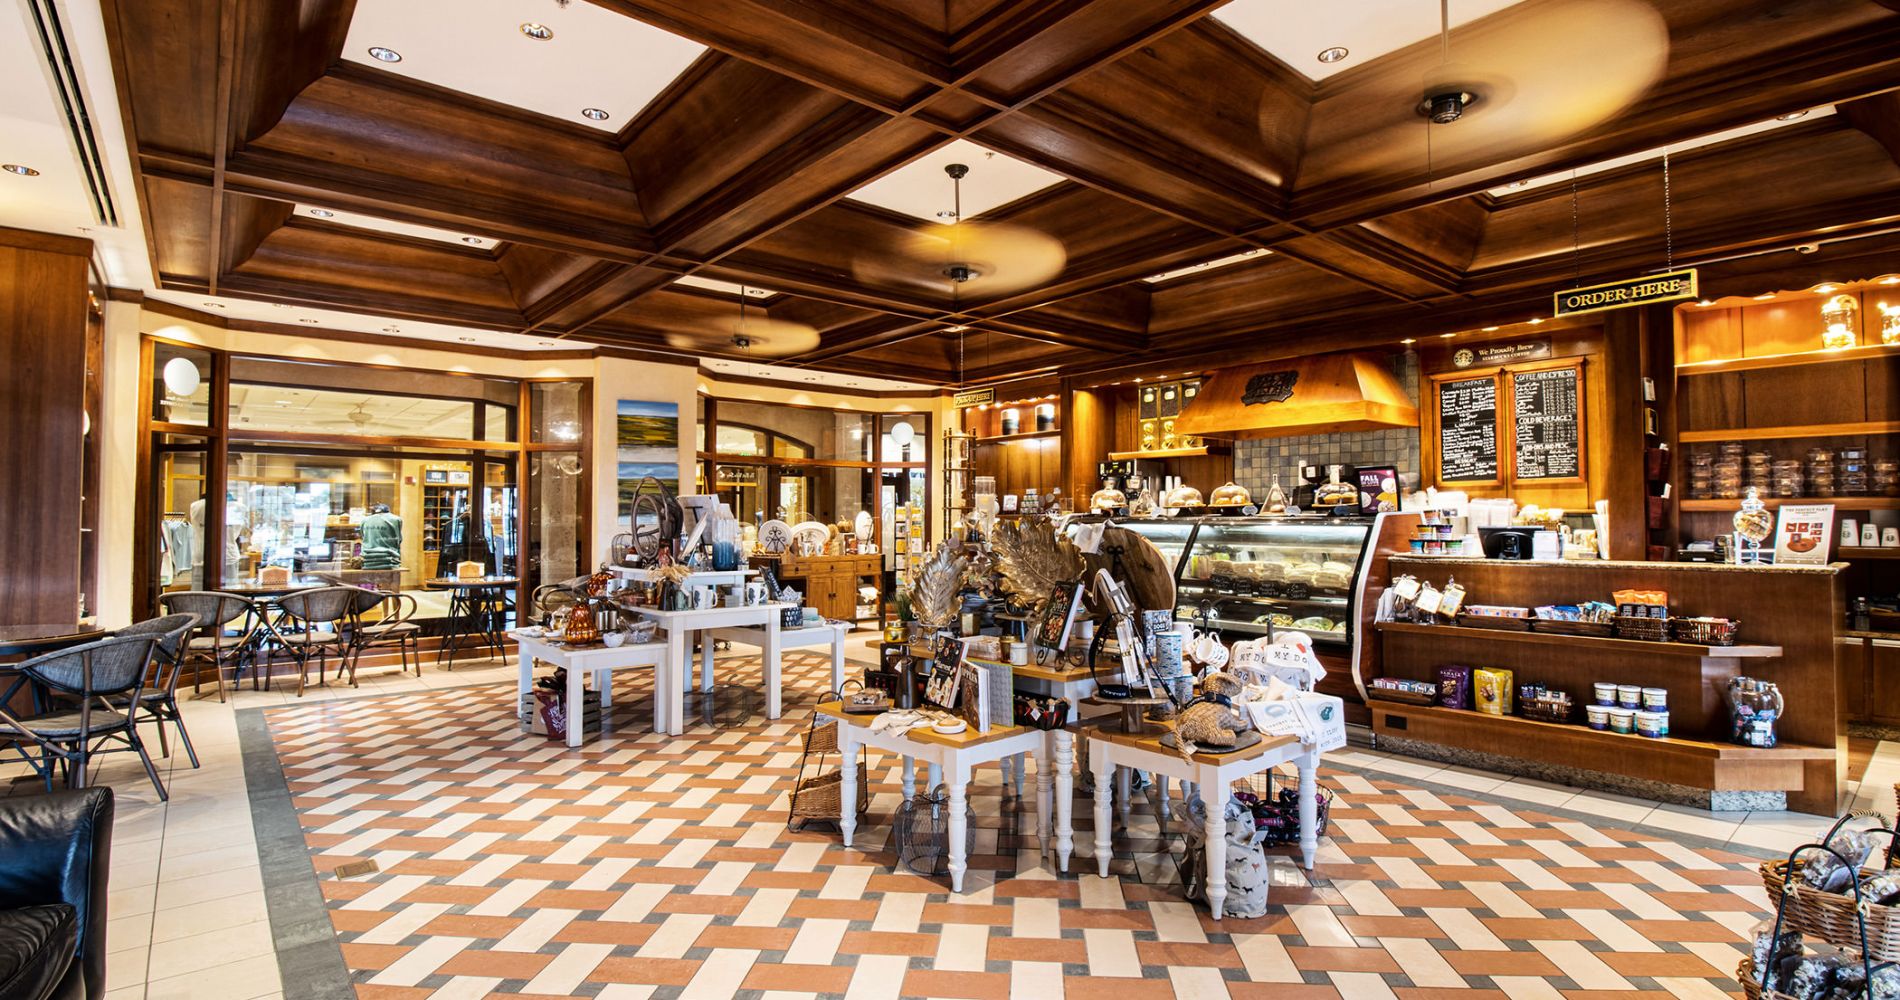 View of the inside of the Gourmet Shop at the Inn